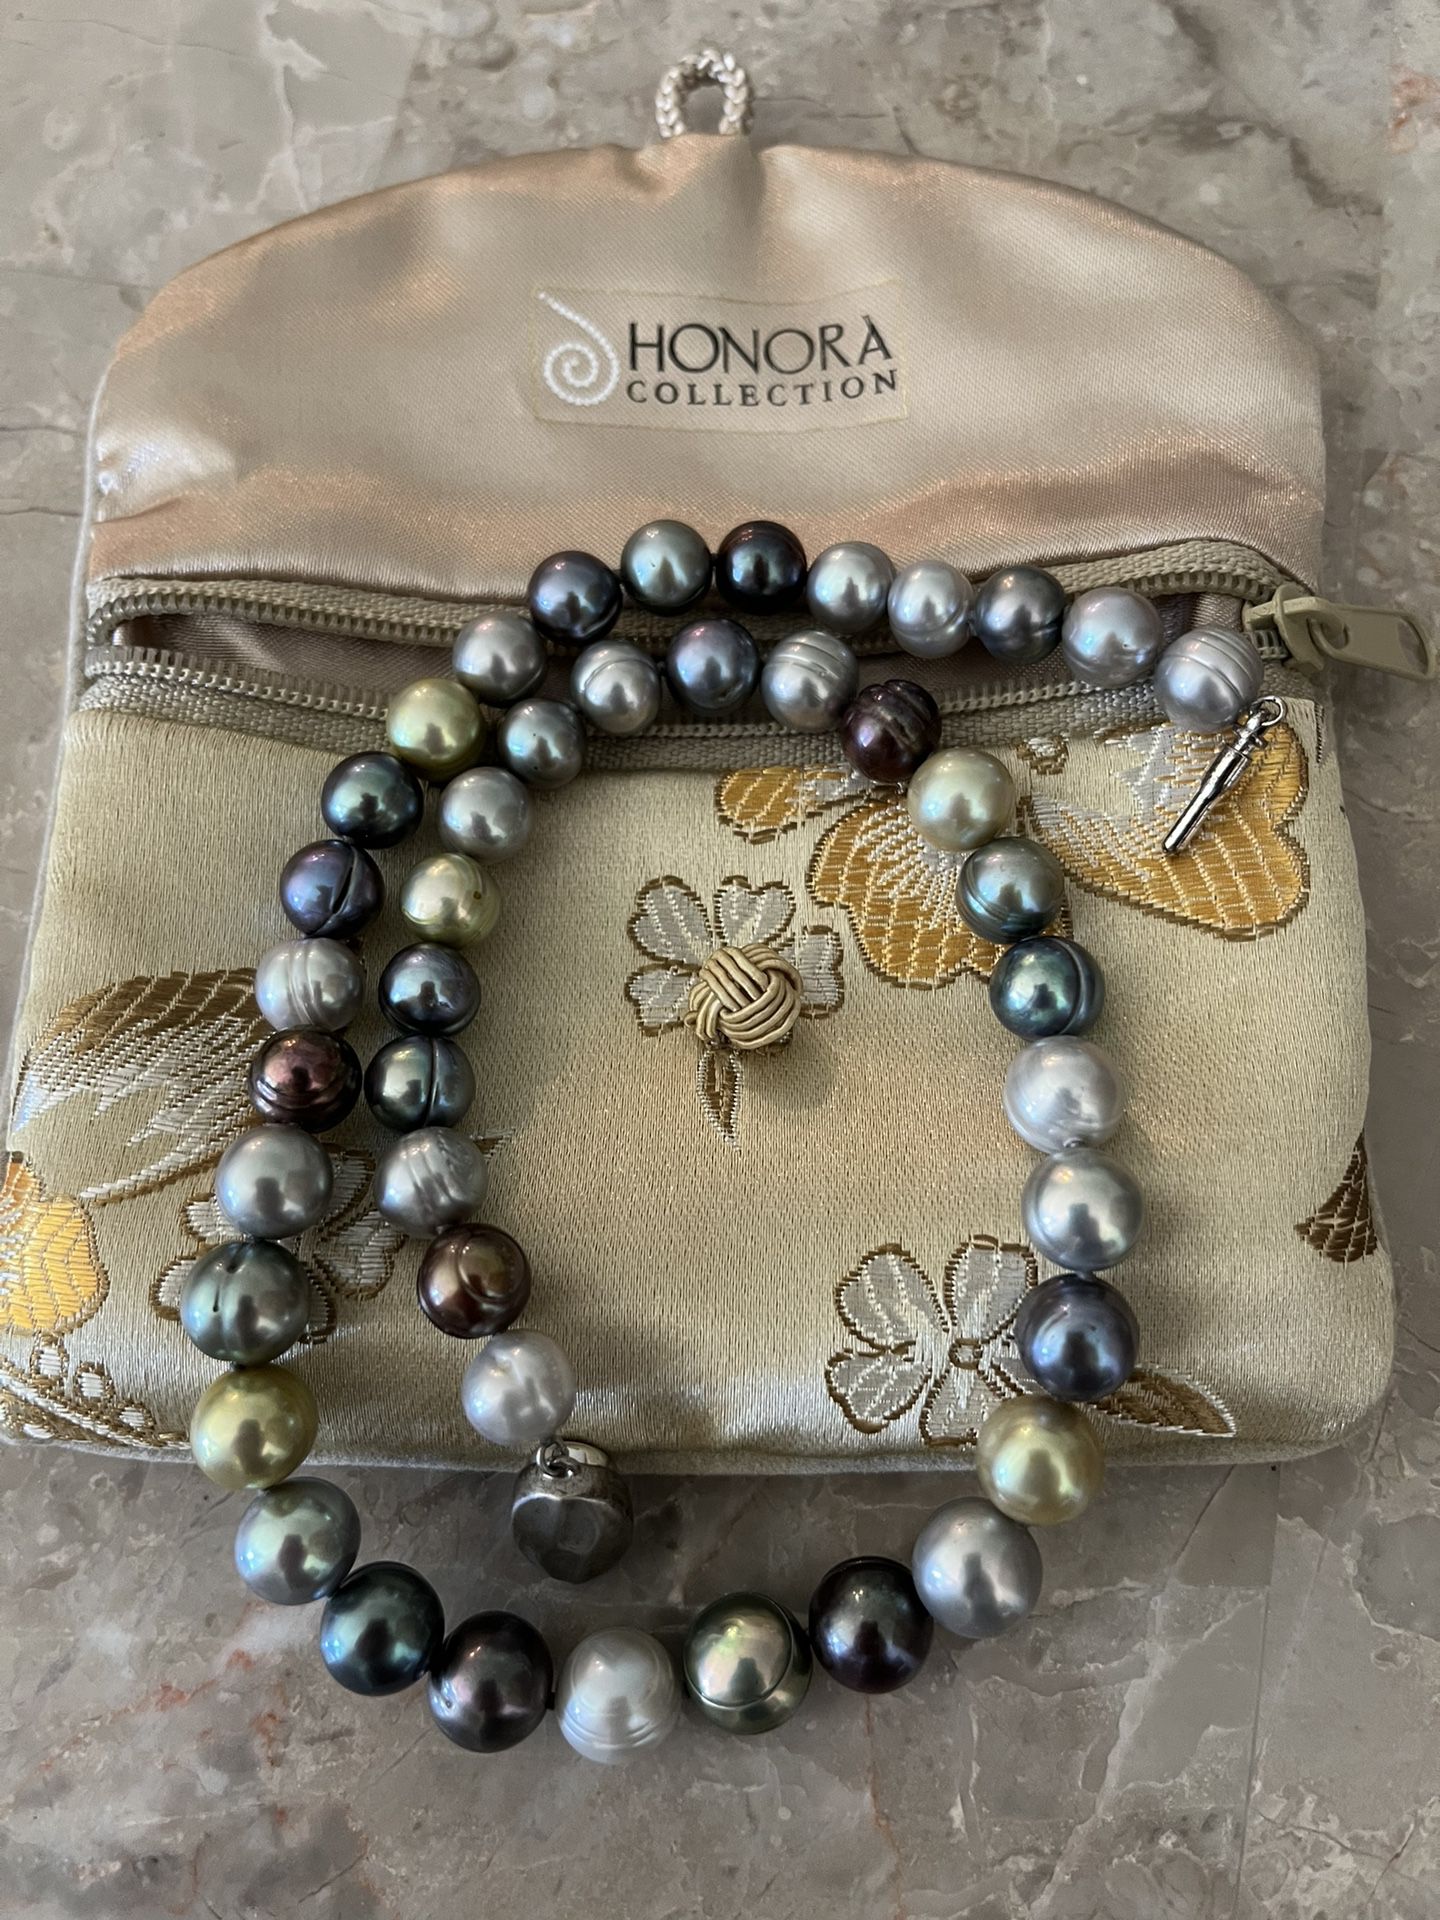 HONORA Exquisite Multi-Color Cultured Freshwater Pearl 16” Strand w/925 Closure - Like NEW 